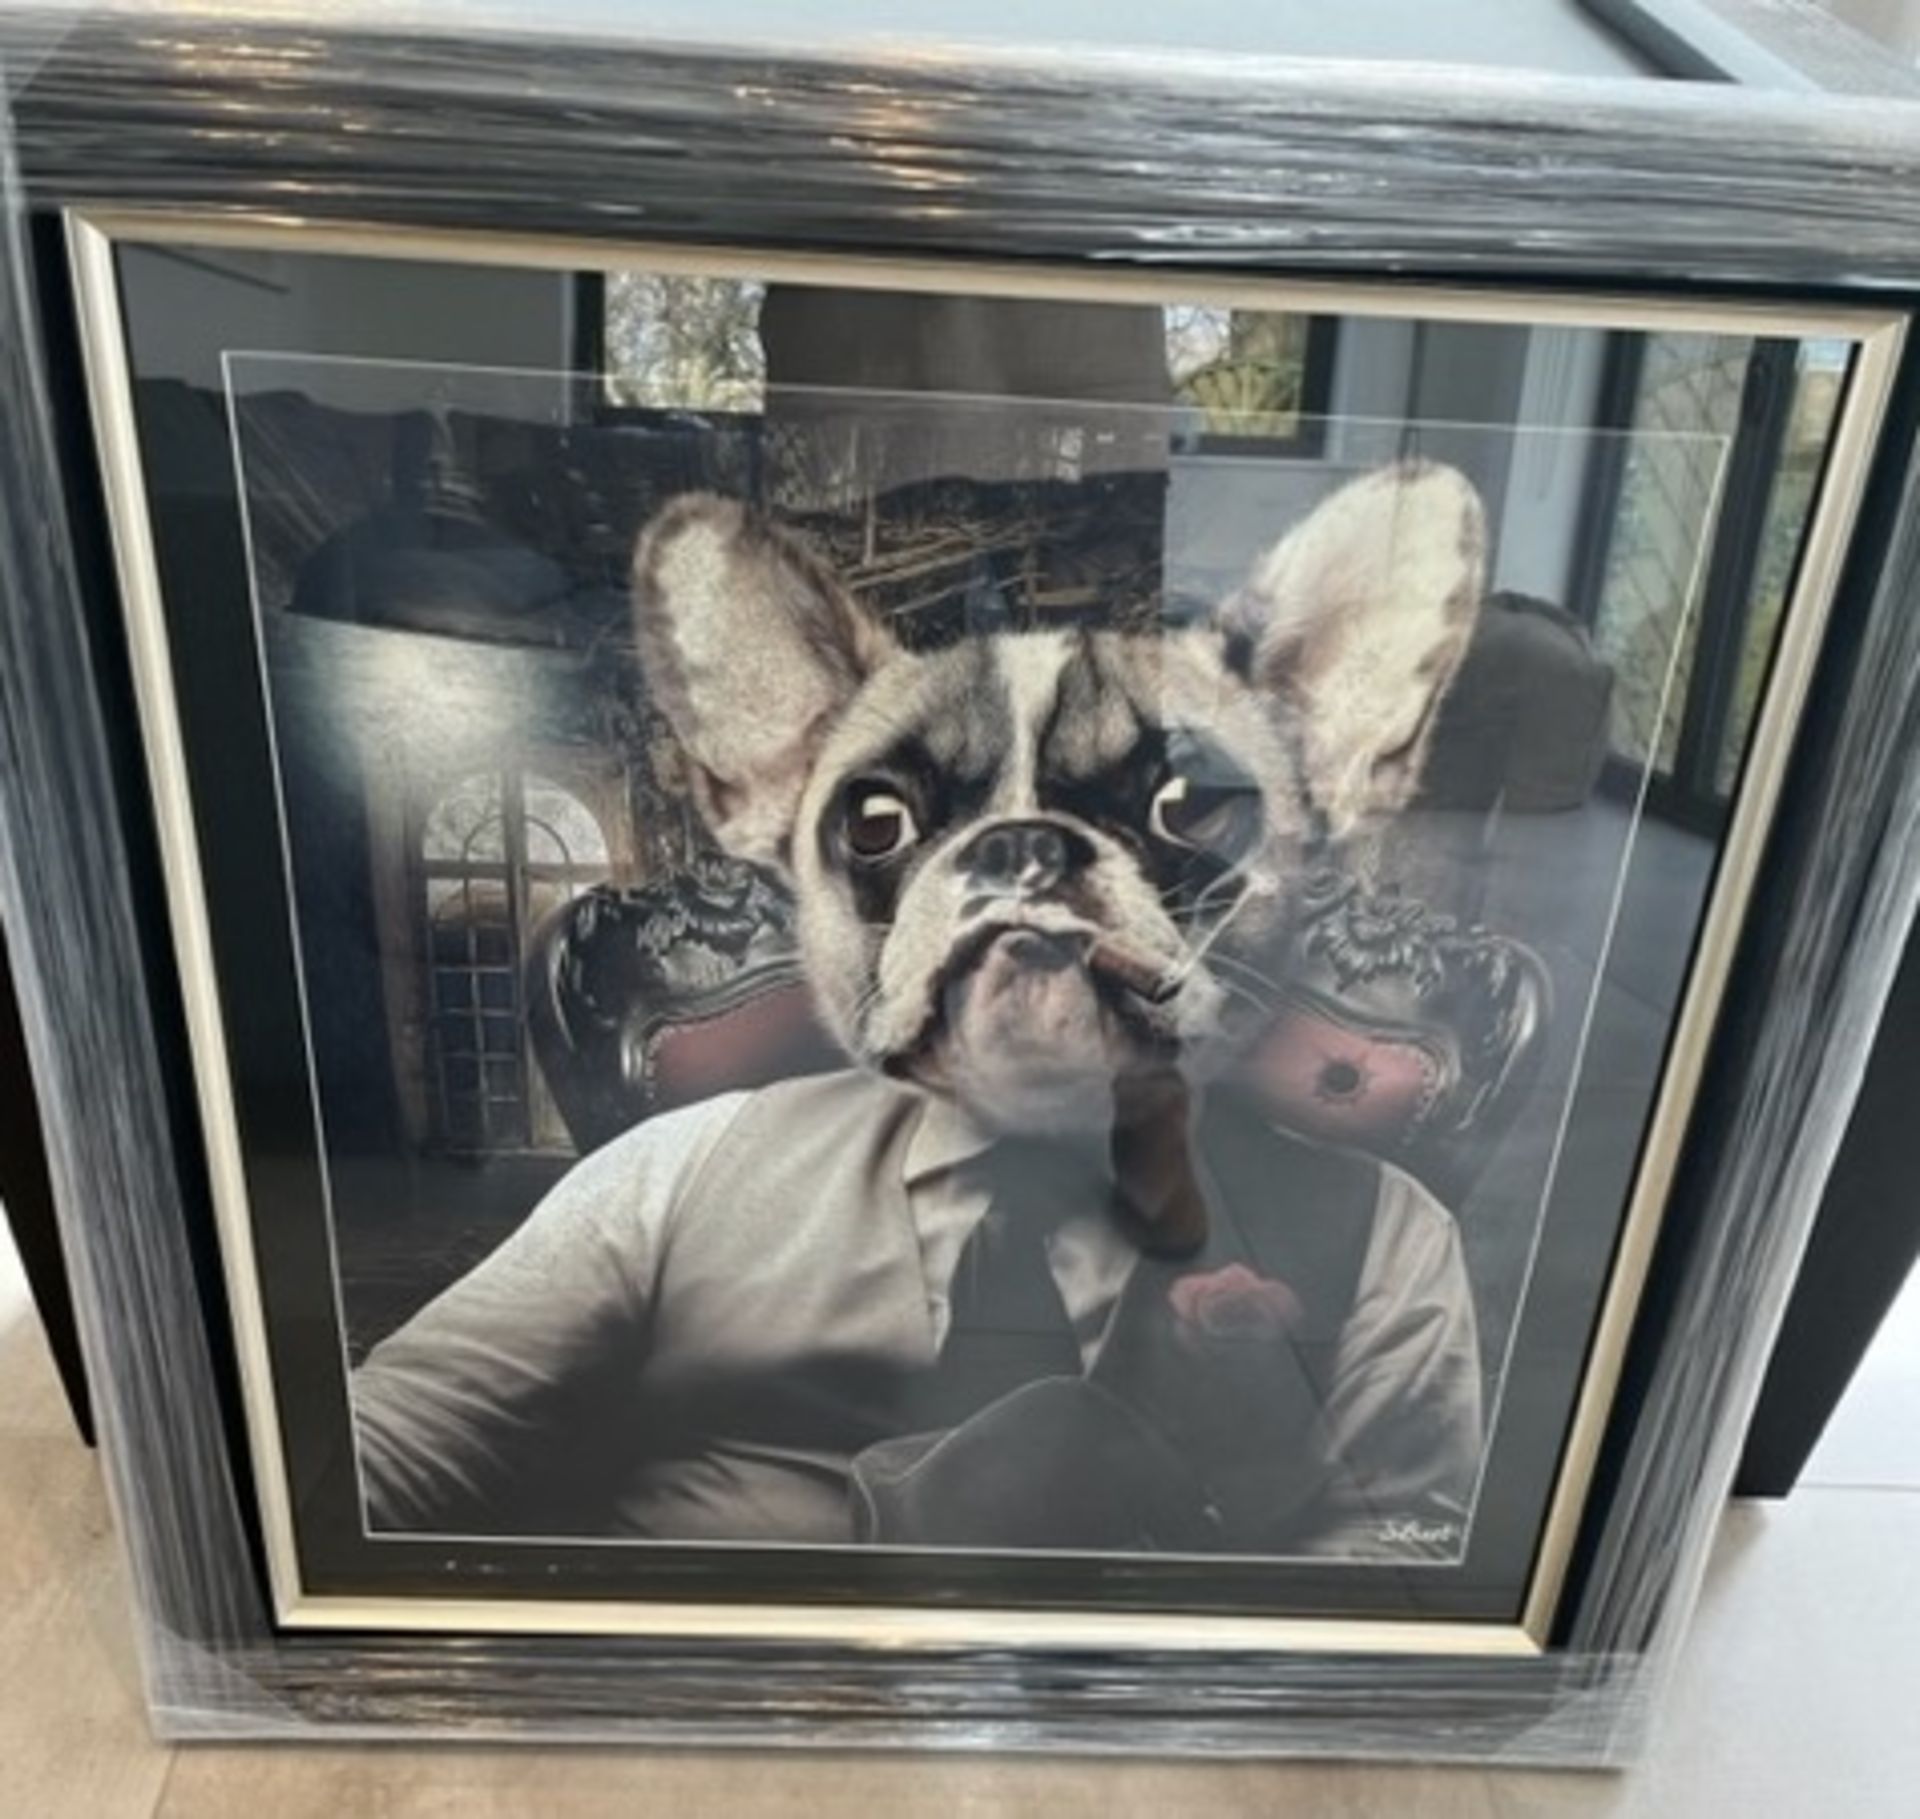 Frenchie The Boss framed art piece by Sylvain Binet - Brand New - Quality UK Manufactured - Image 2 of 4